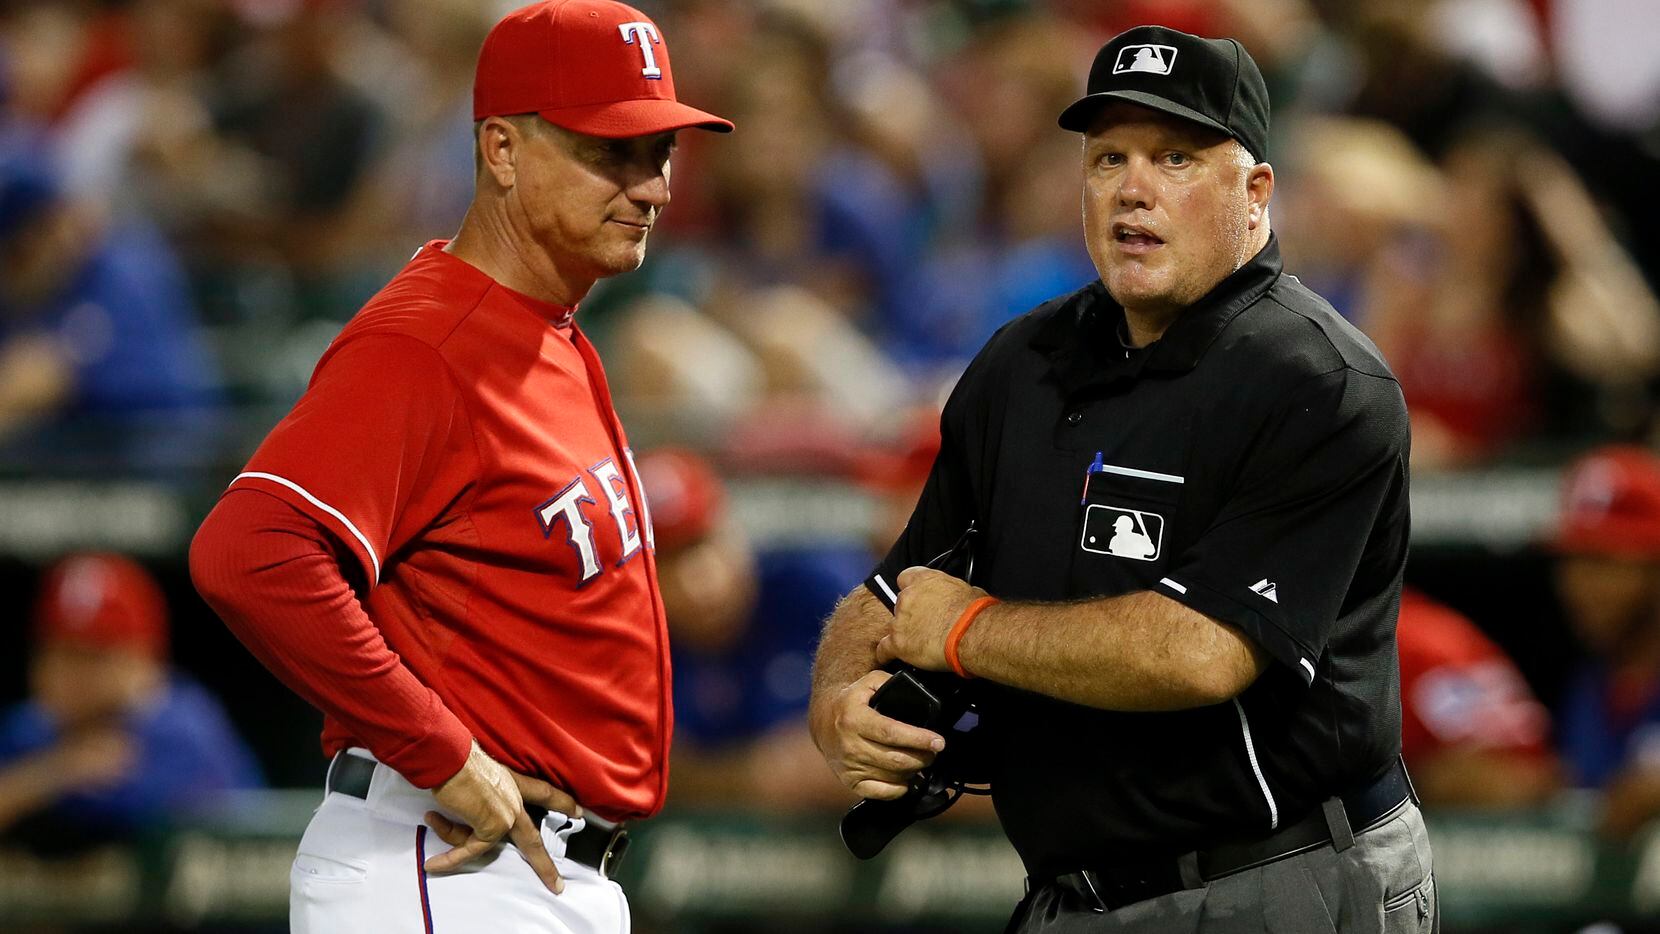 Gosselin: Why local teams' scouts have eyes on umpires, referees